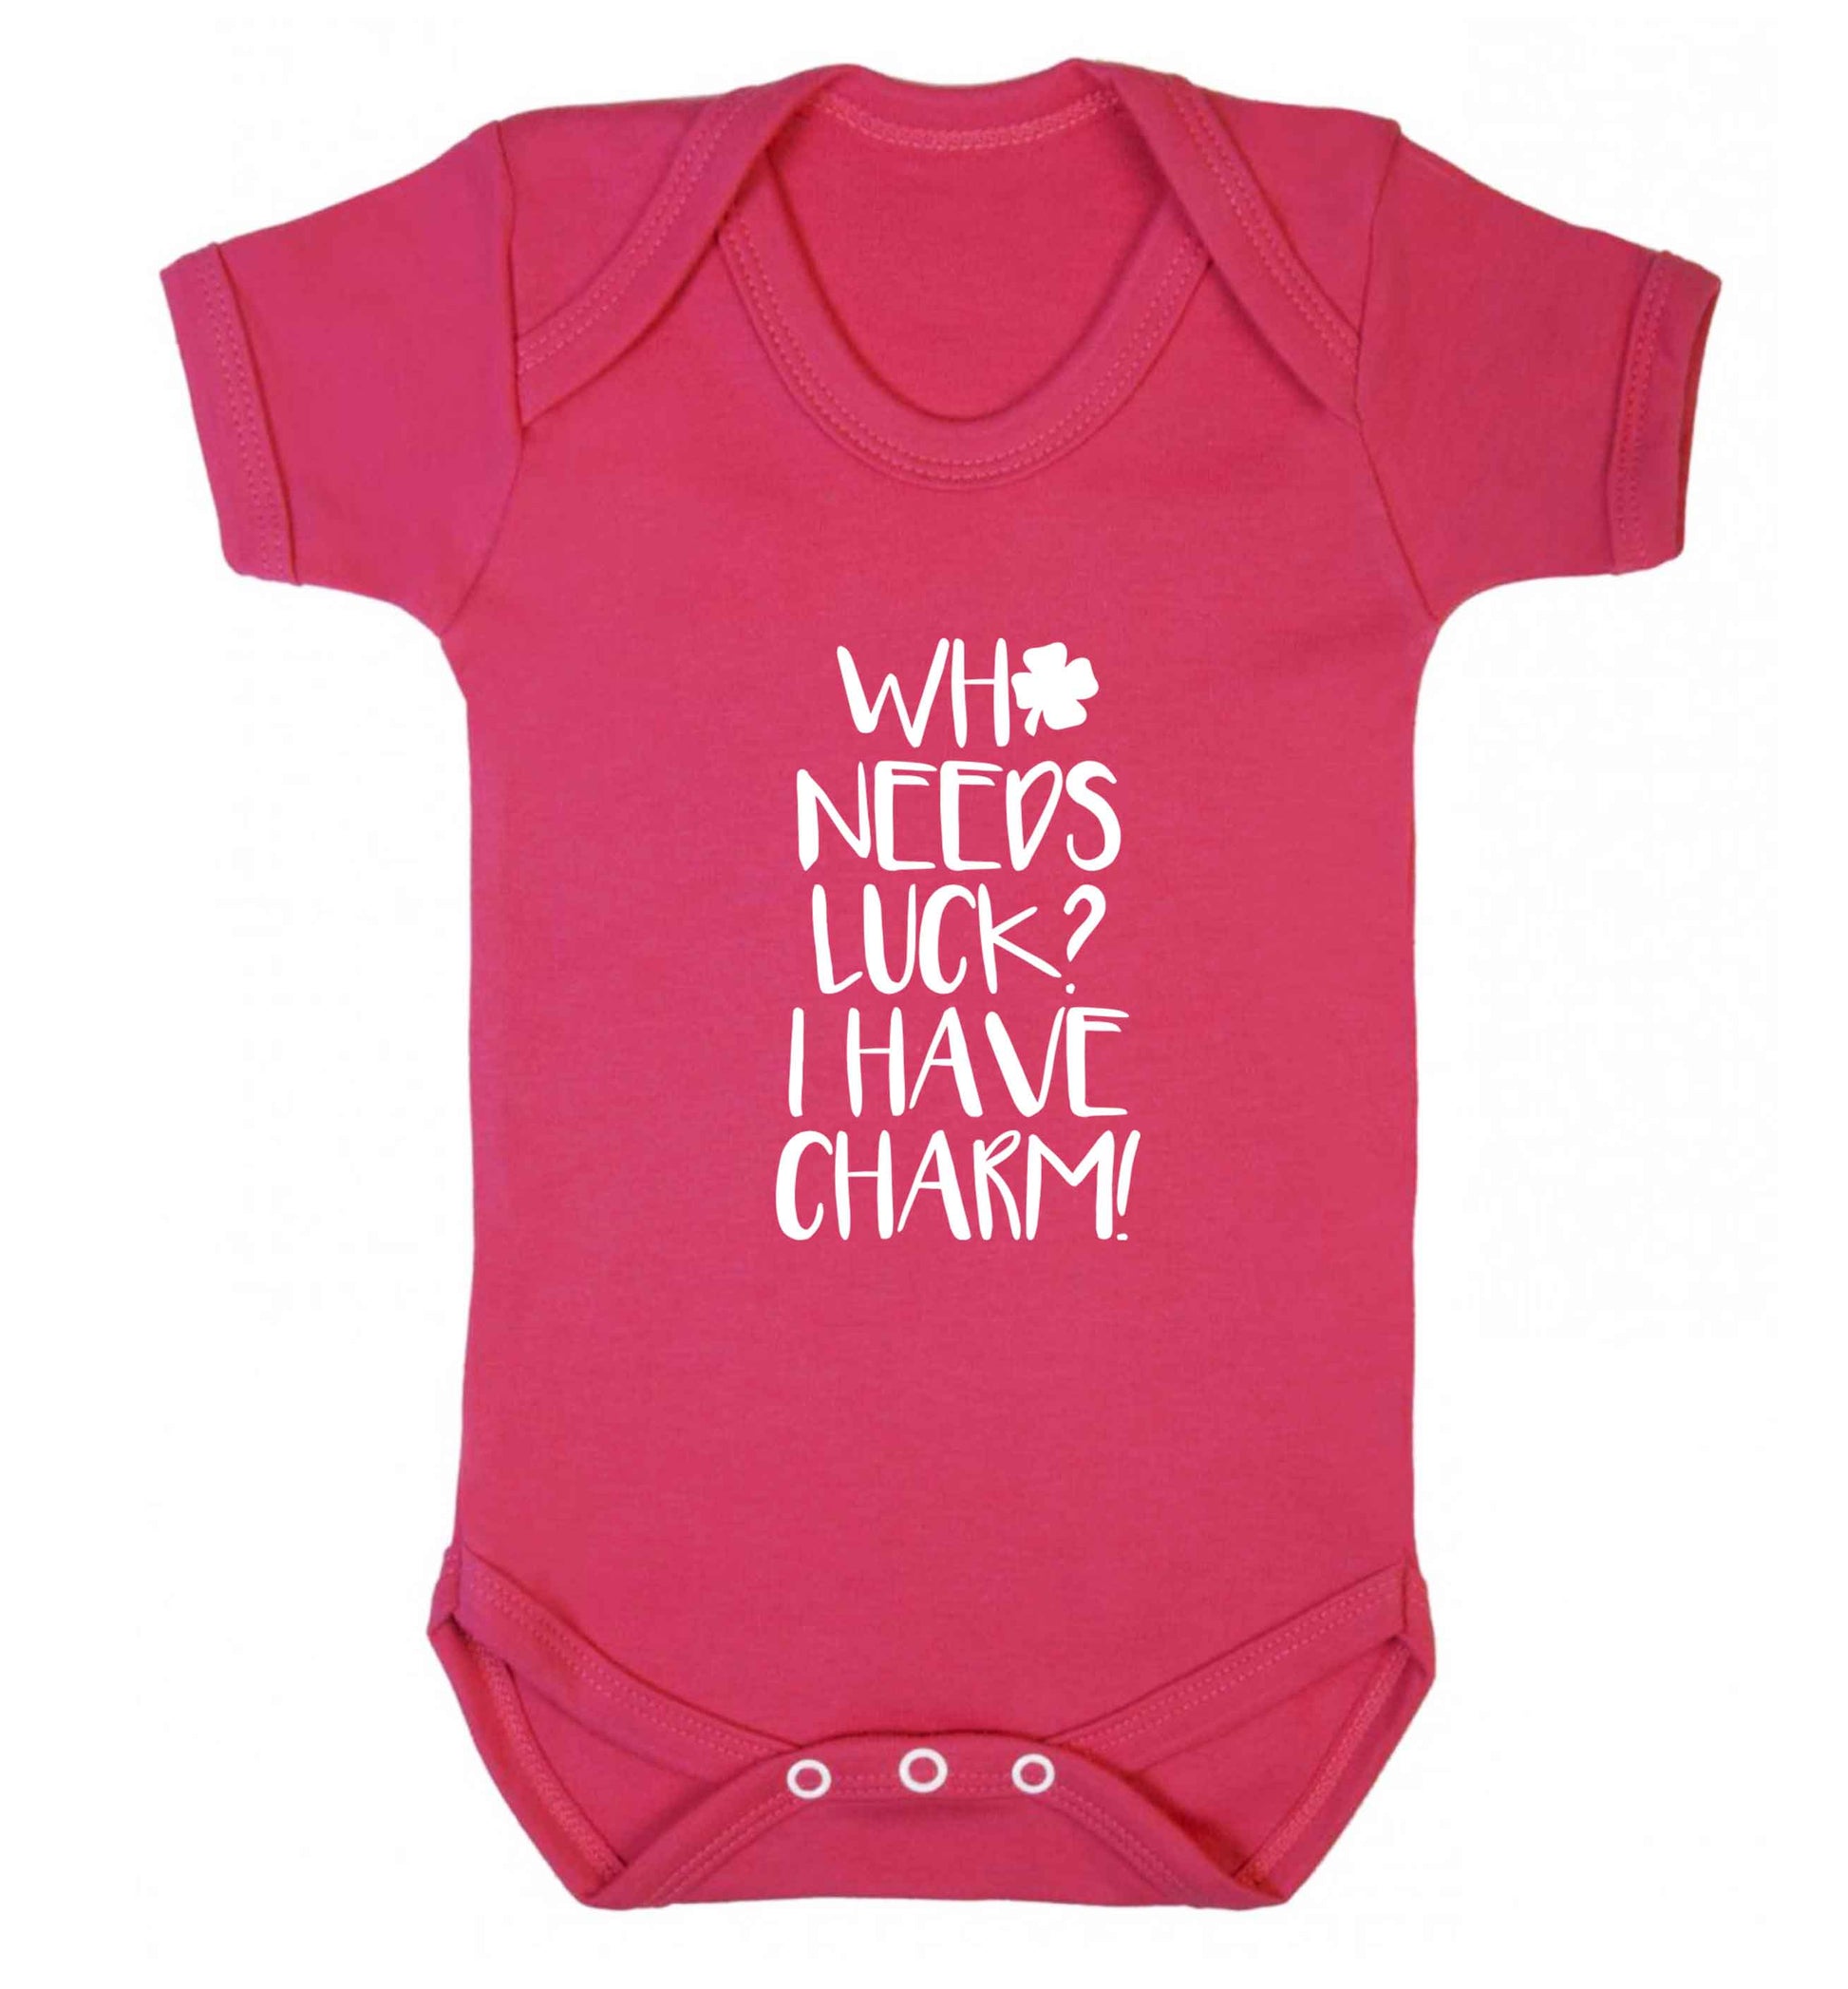 Who needs luck? I have charm! baby vest dark pink 18-24 months